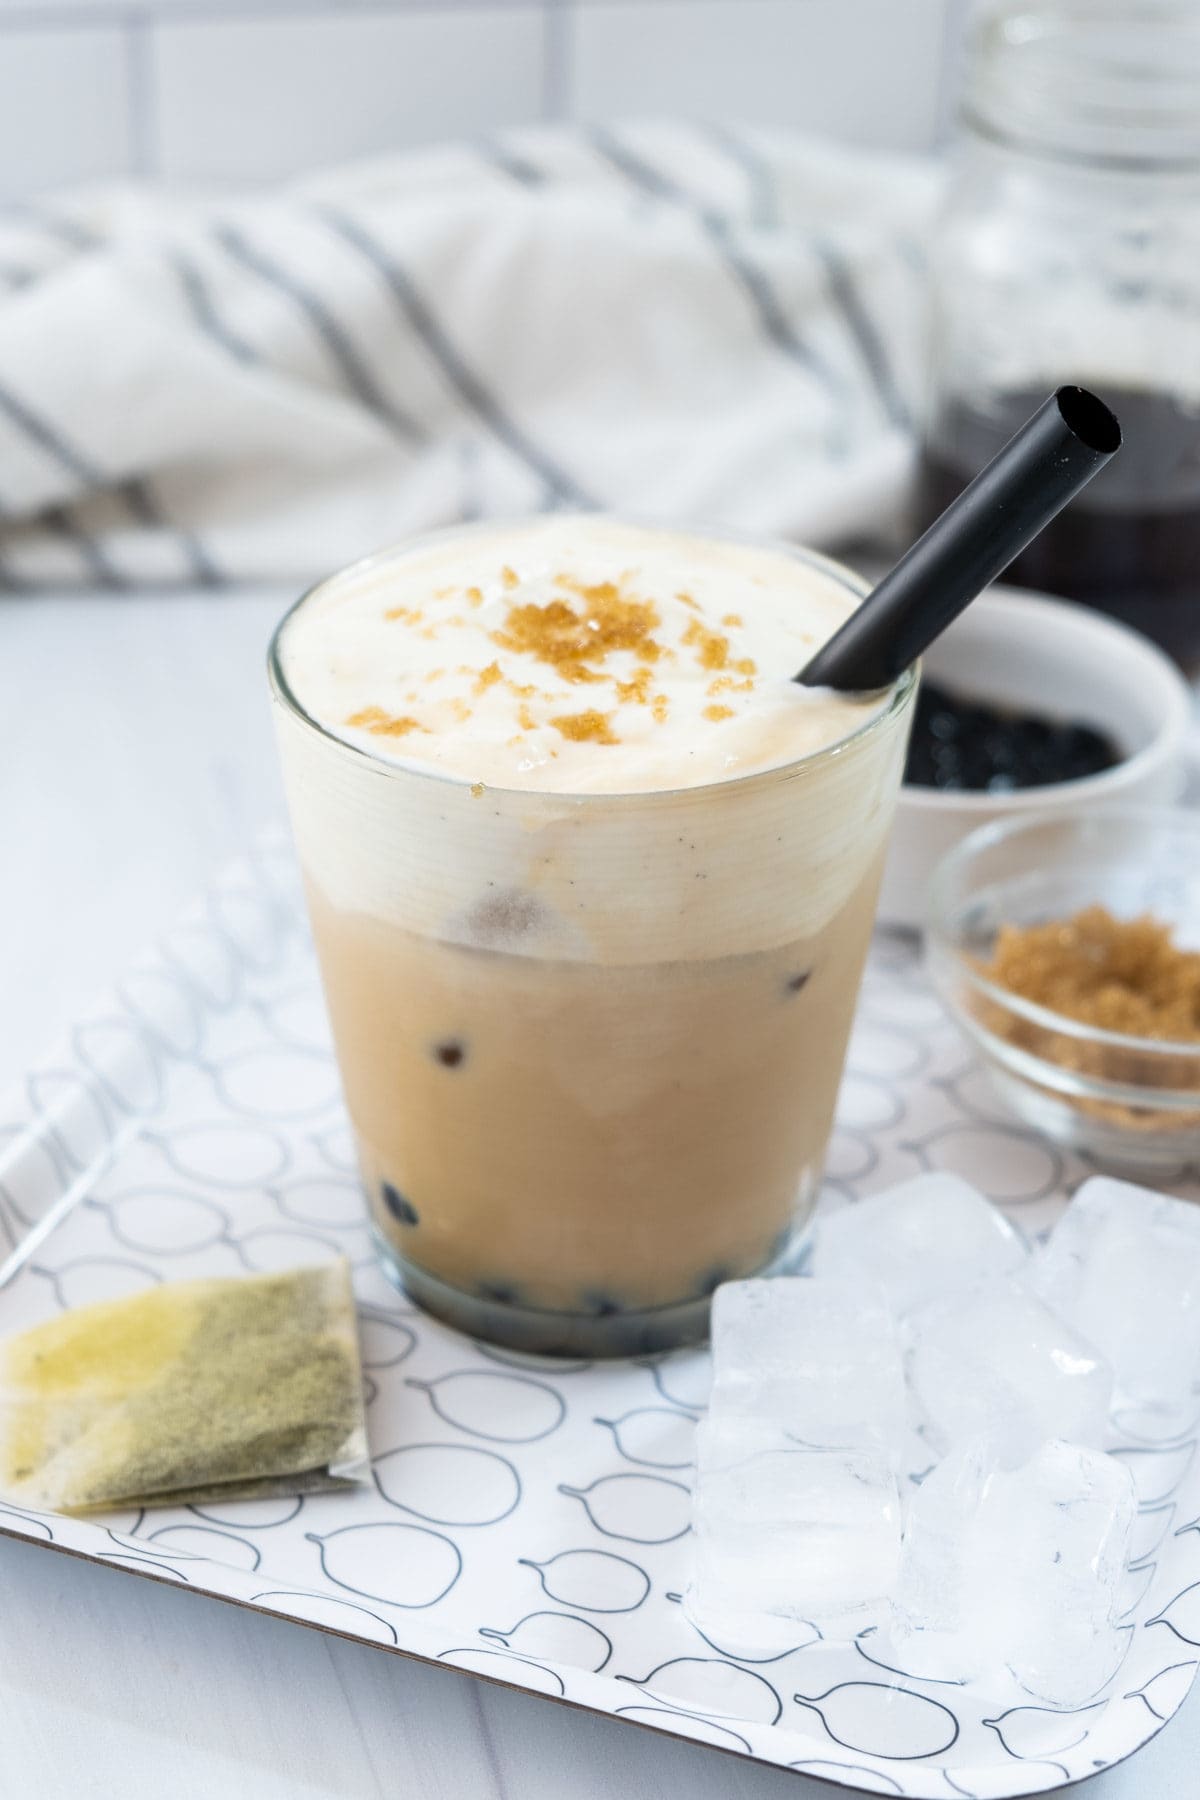 iced milk tea with brown sugar syrup